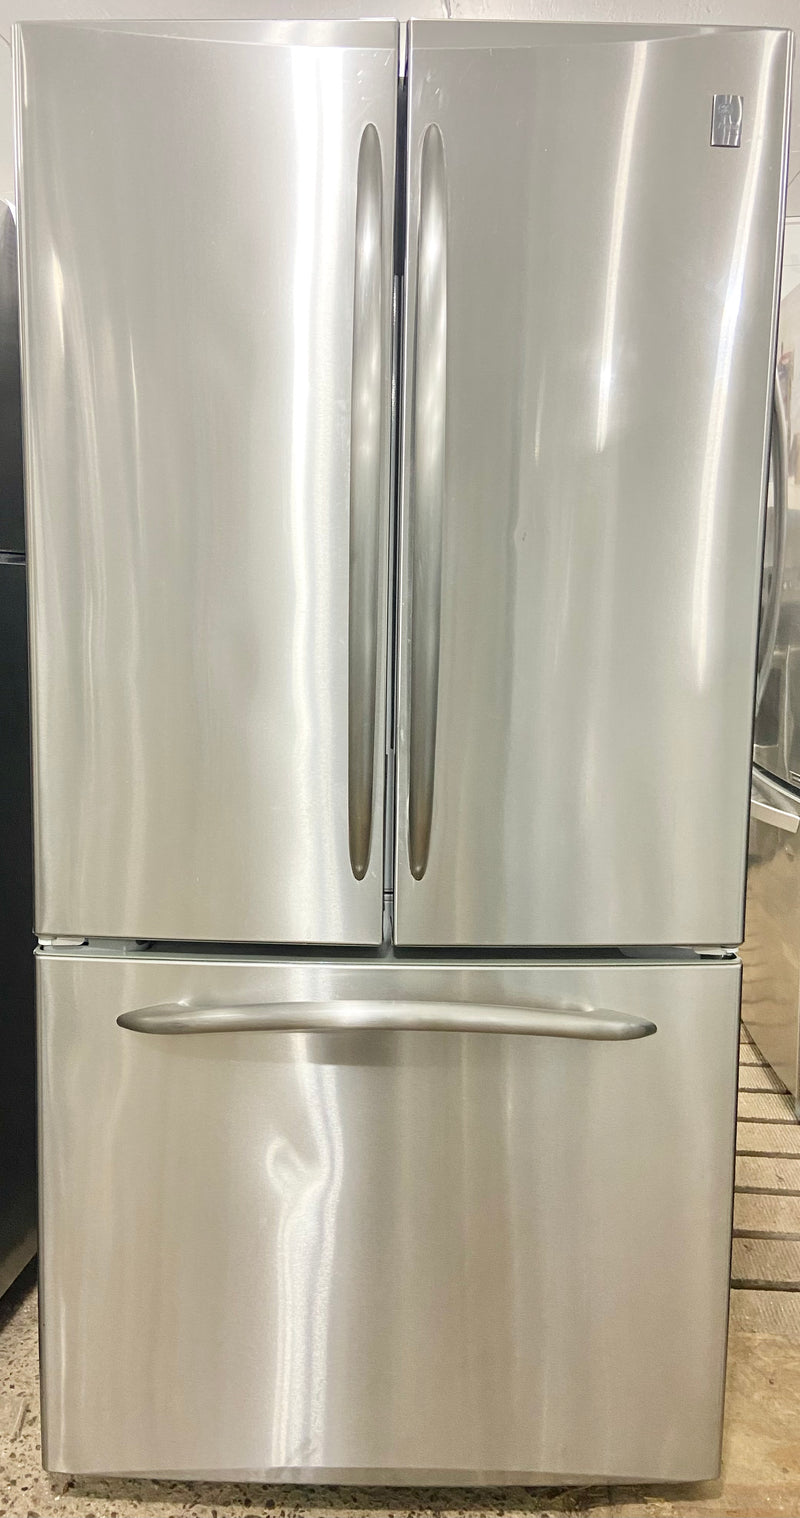 GE 33'' Wide Stainless Steel French Door Fridge with Water and Ice Maker, Free 60 Day Warranty